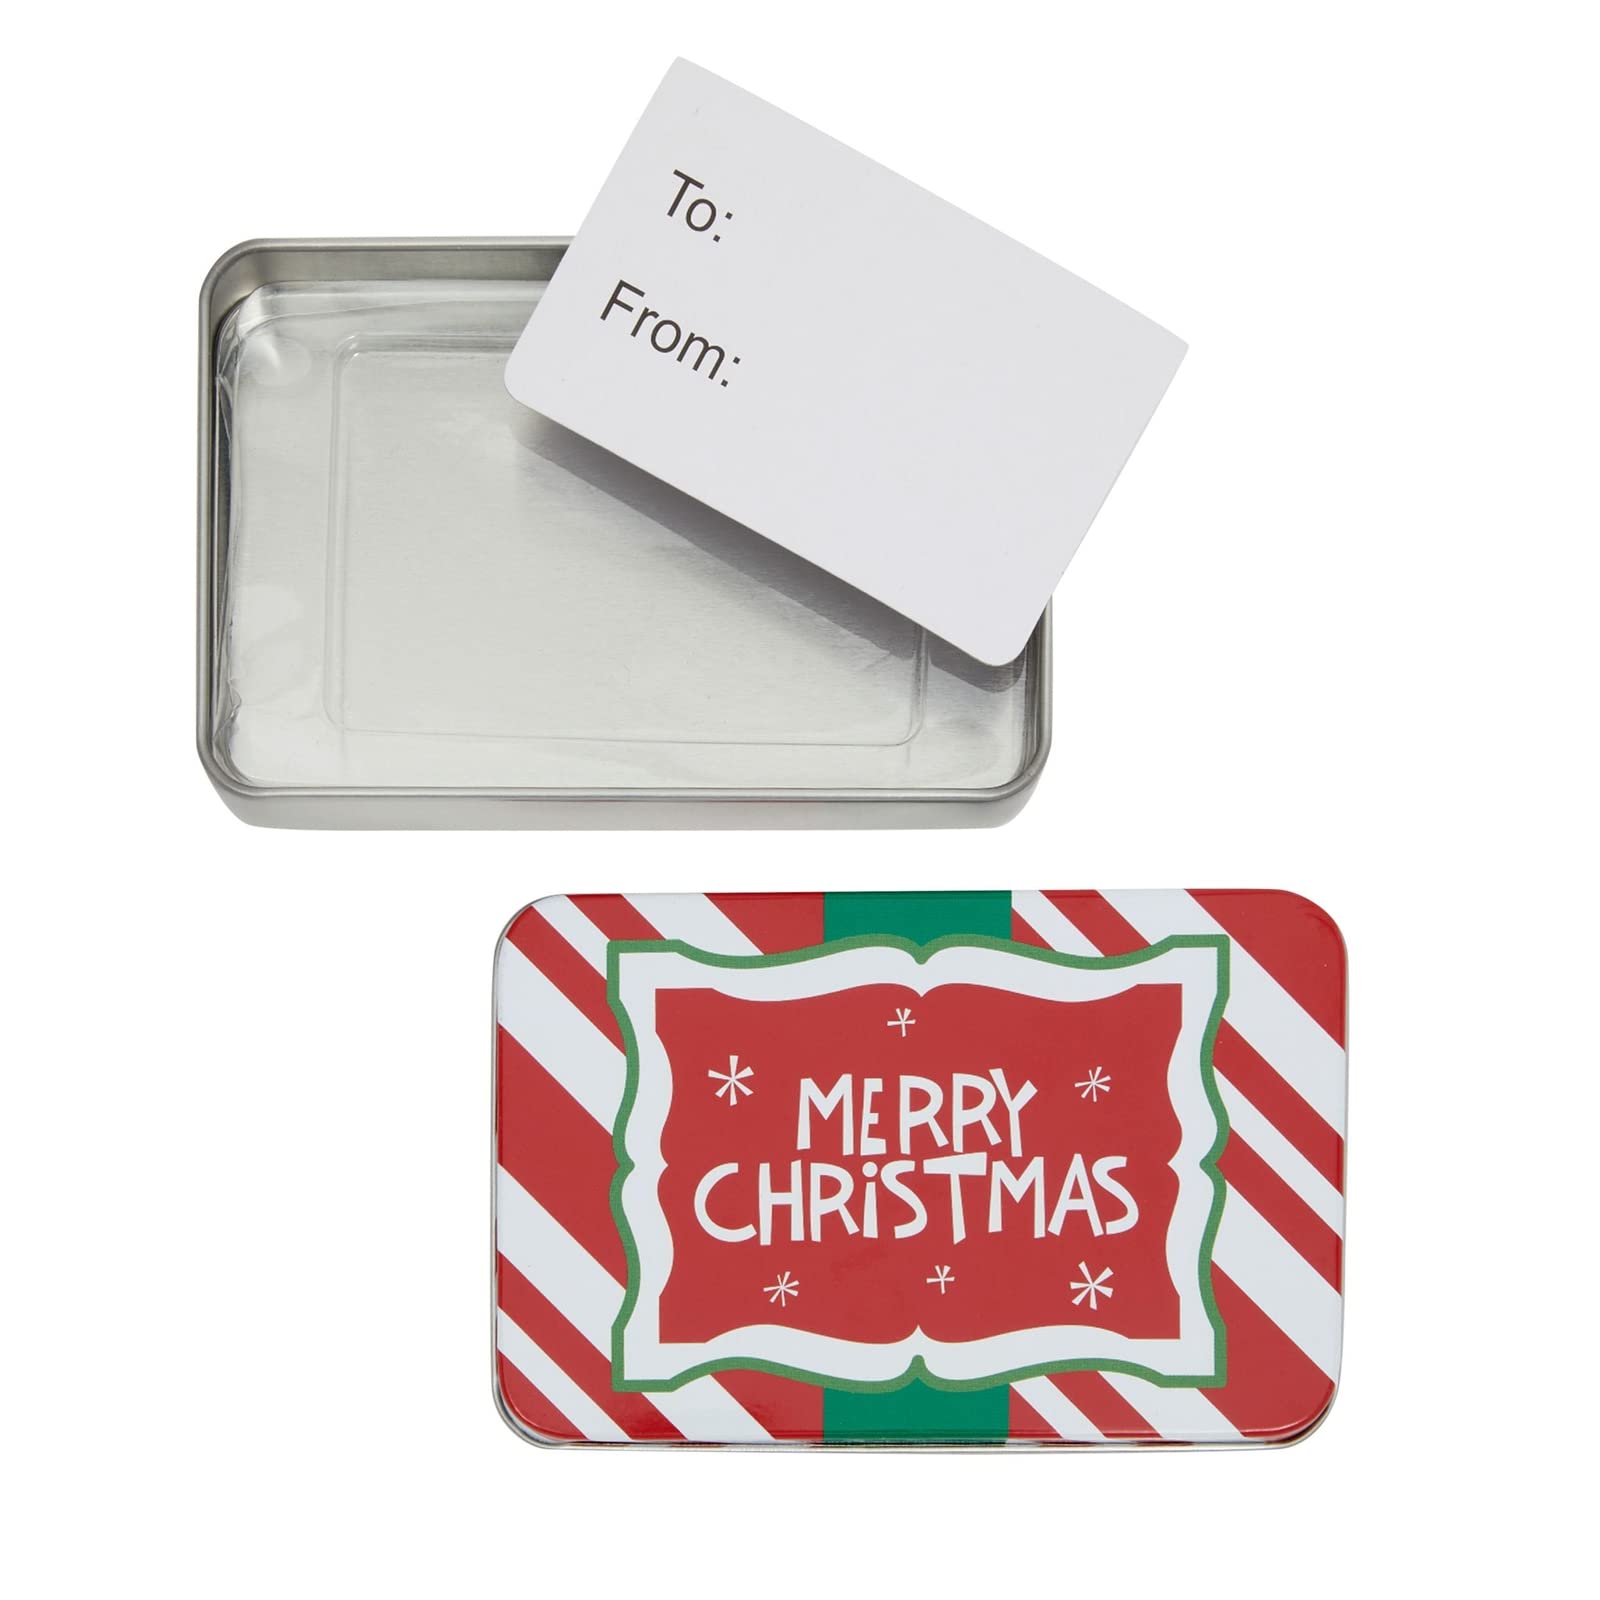 Juvale 5 Pack Christmas Gift Card Holders with Lids, Decorative Tin Boxes for Stocking Stuffers (4.9 x 3.2 x 0.8 In)